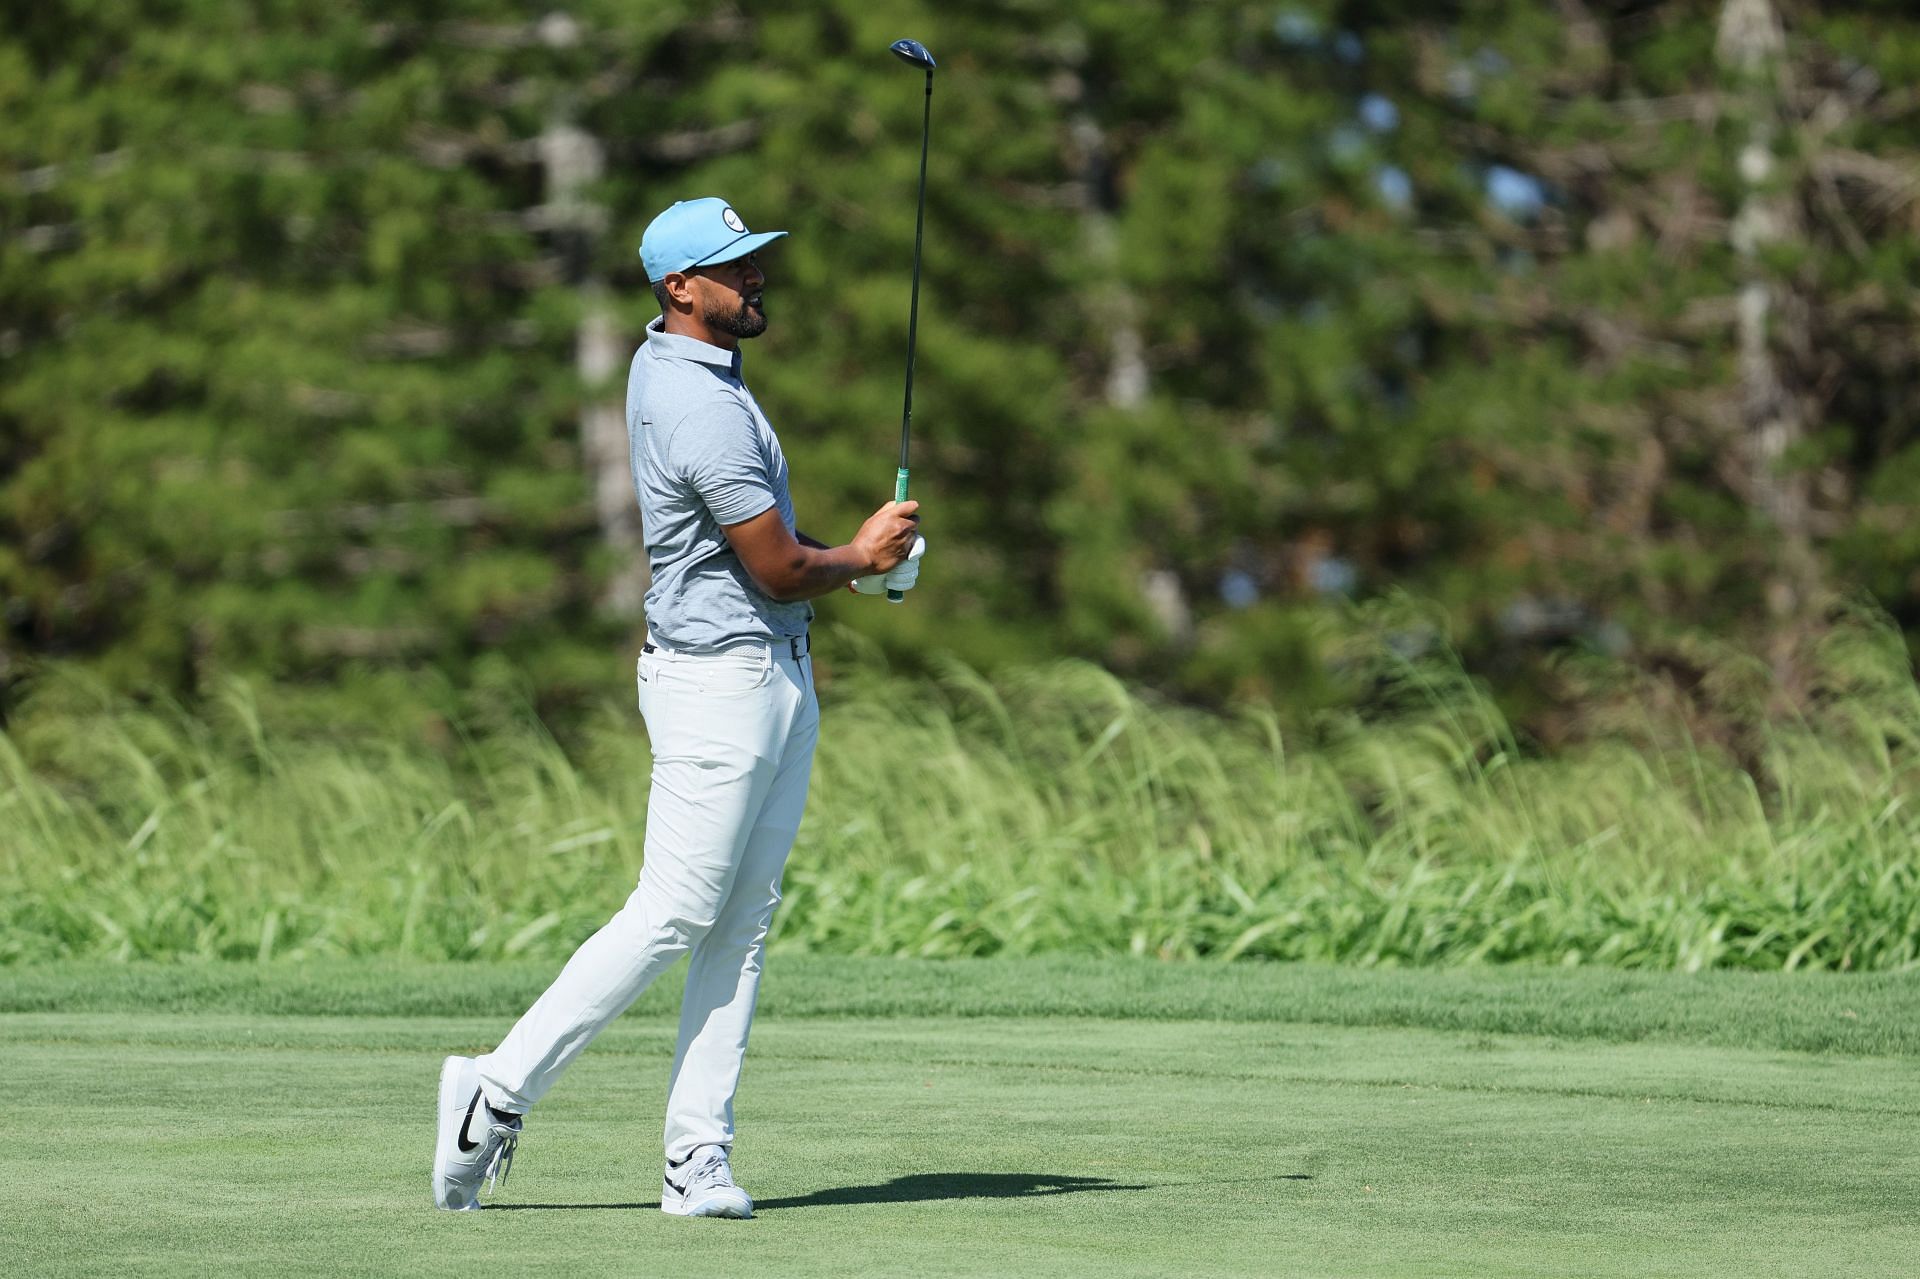 Tony Finau at the Sentry Tournament of Champions - Round Three (Image via Andy Lyons/Getty Images)